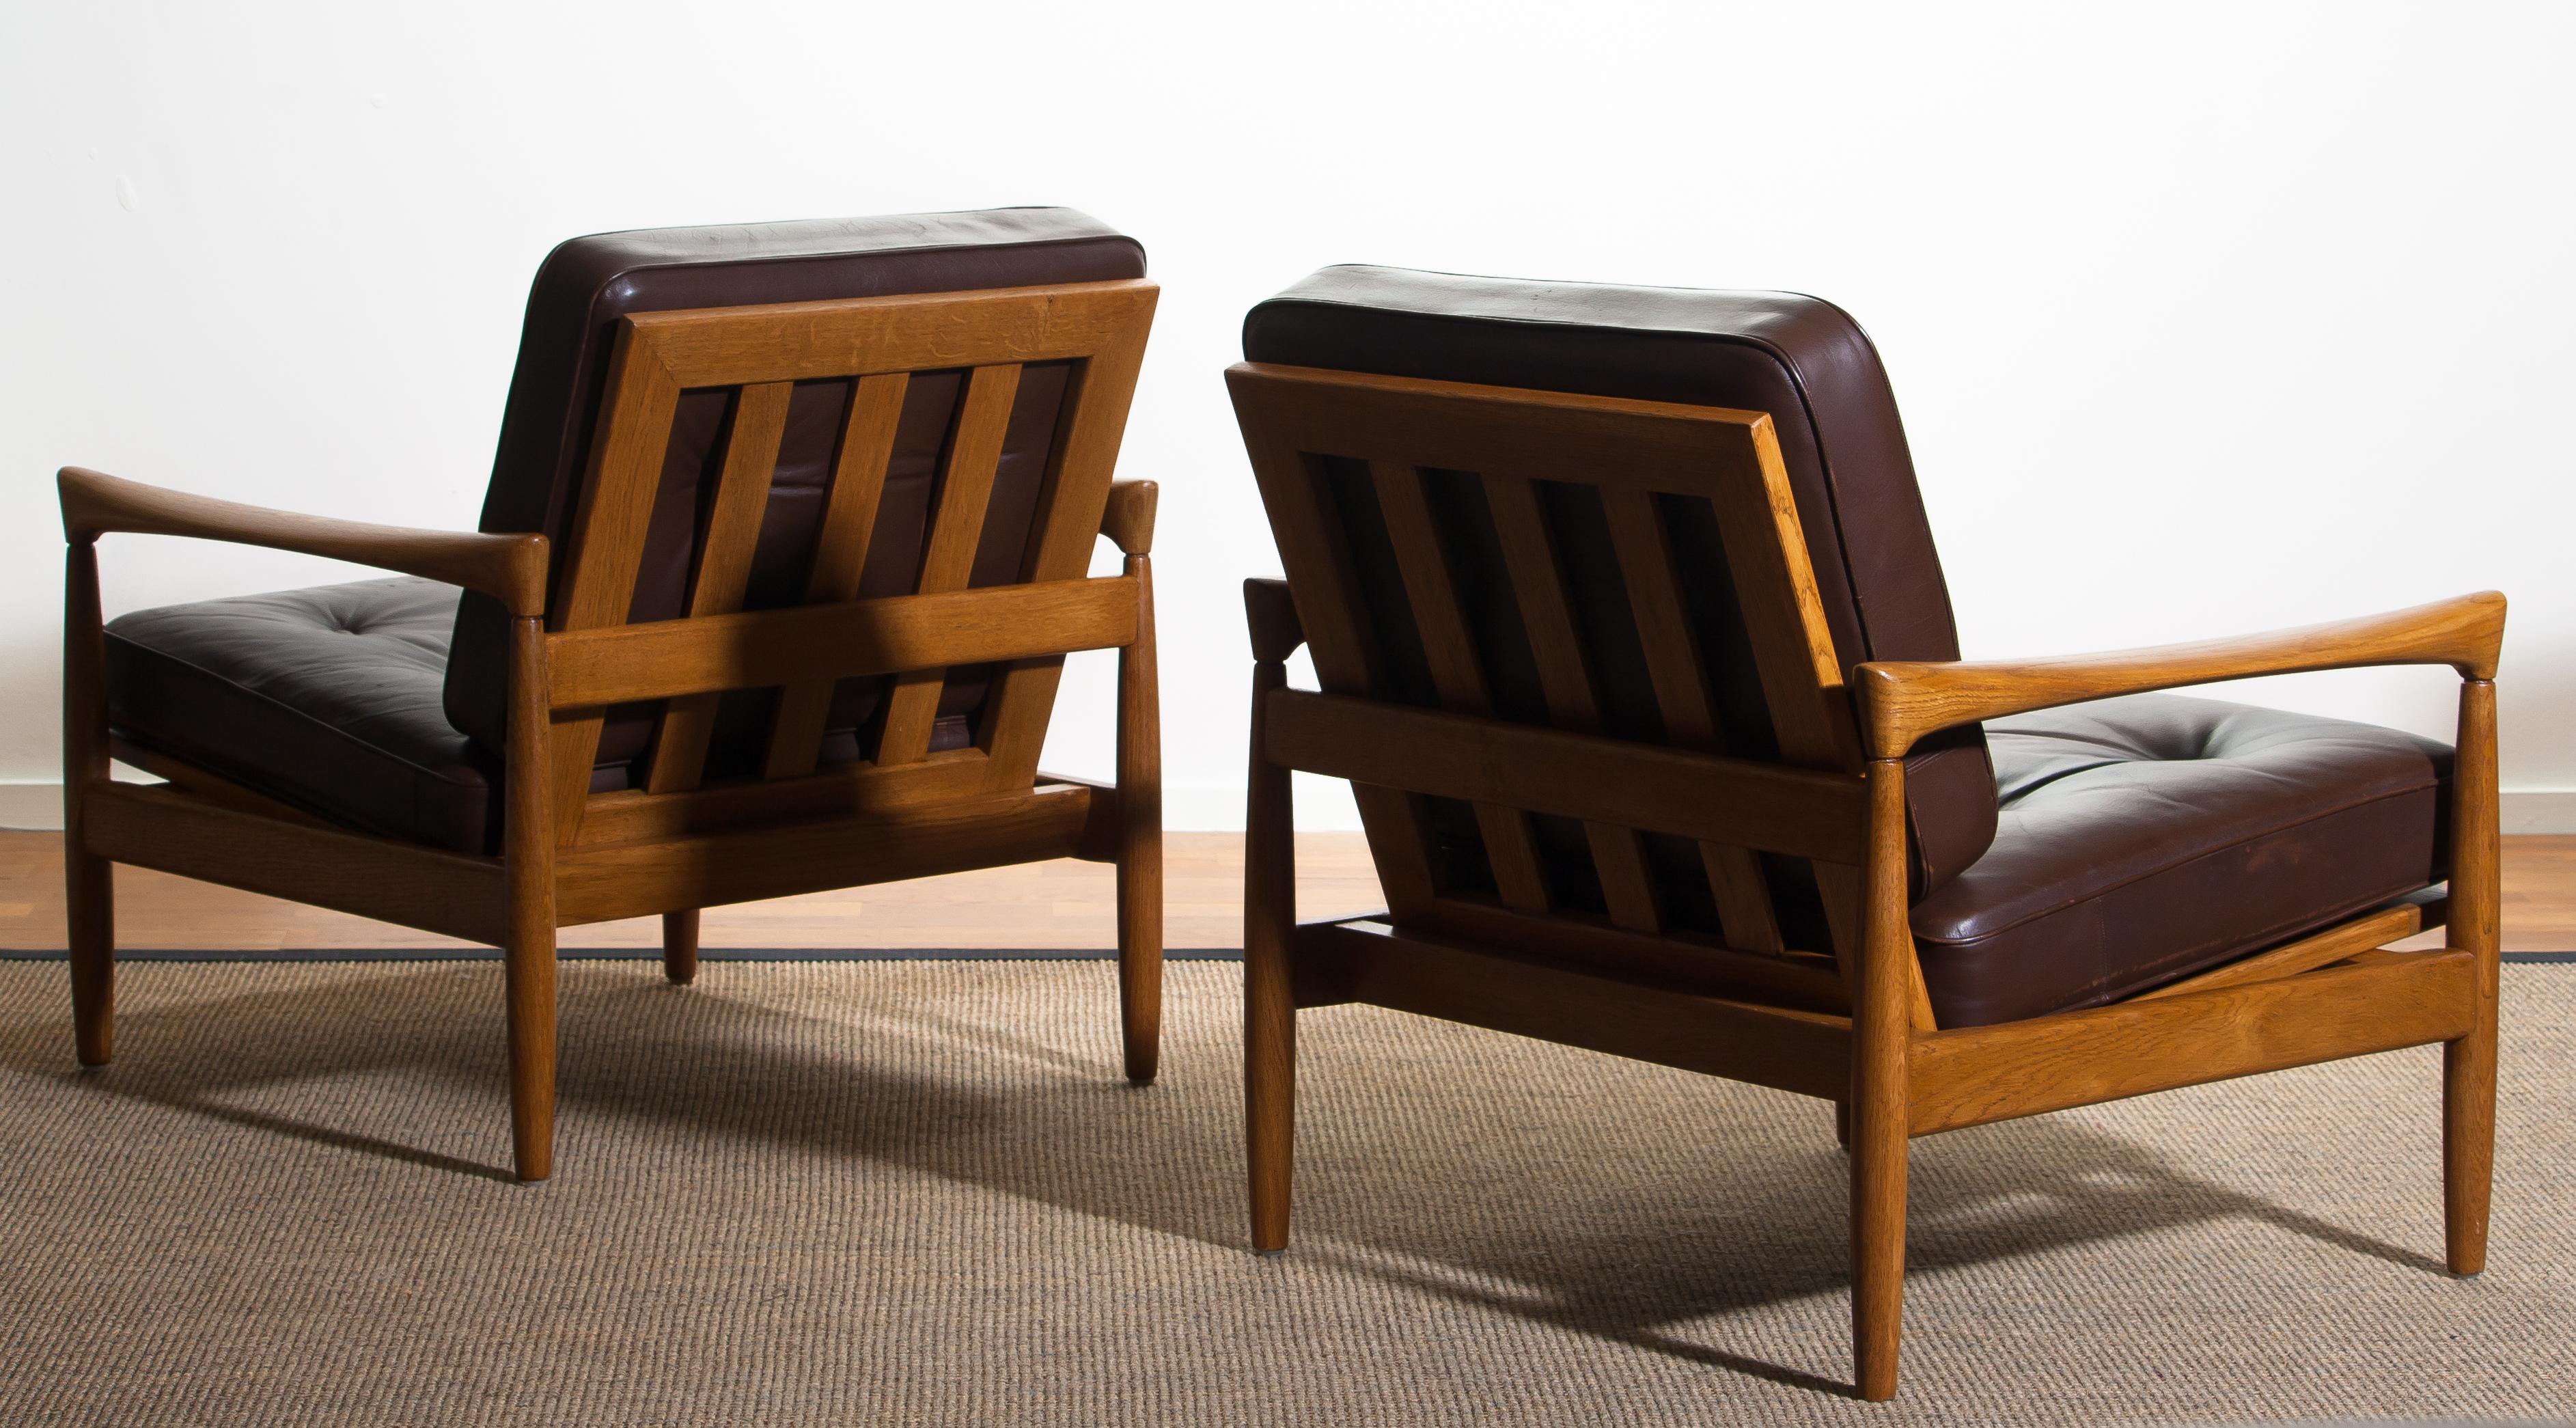 1960s, Set of Two Oak and Brown Leather Easy or Lounge Chairs by Erik Wörtz 1